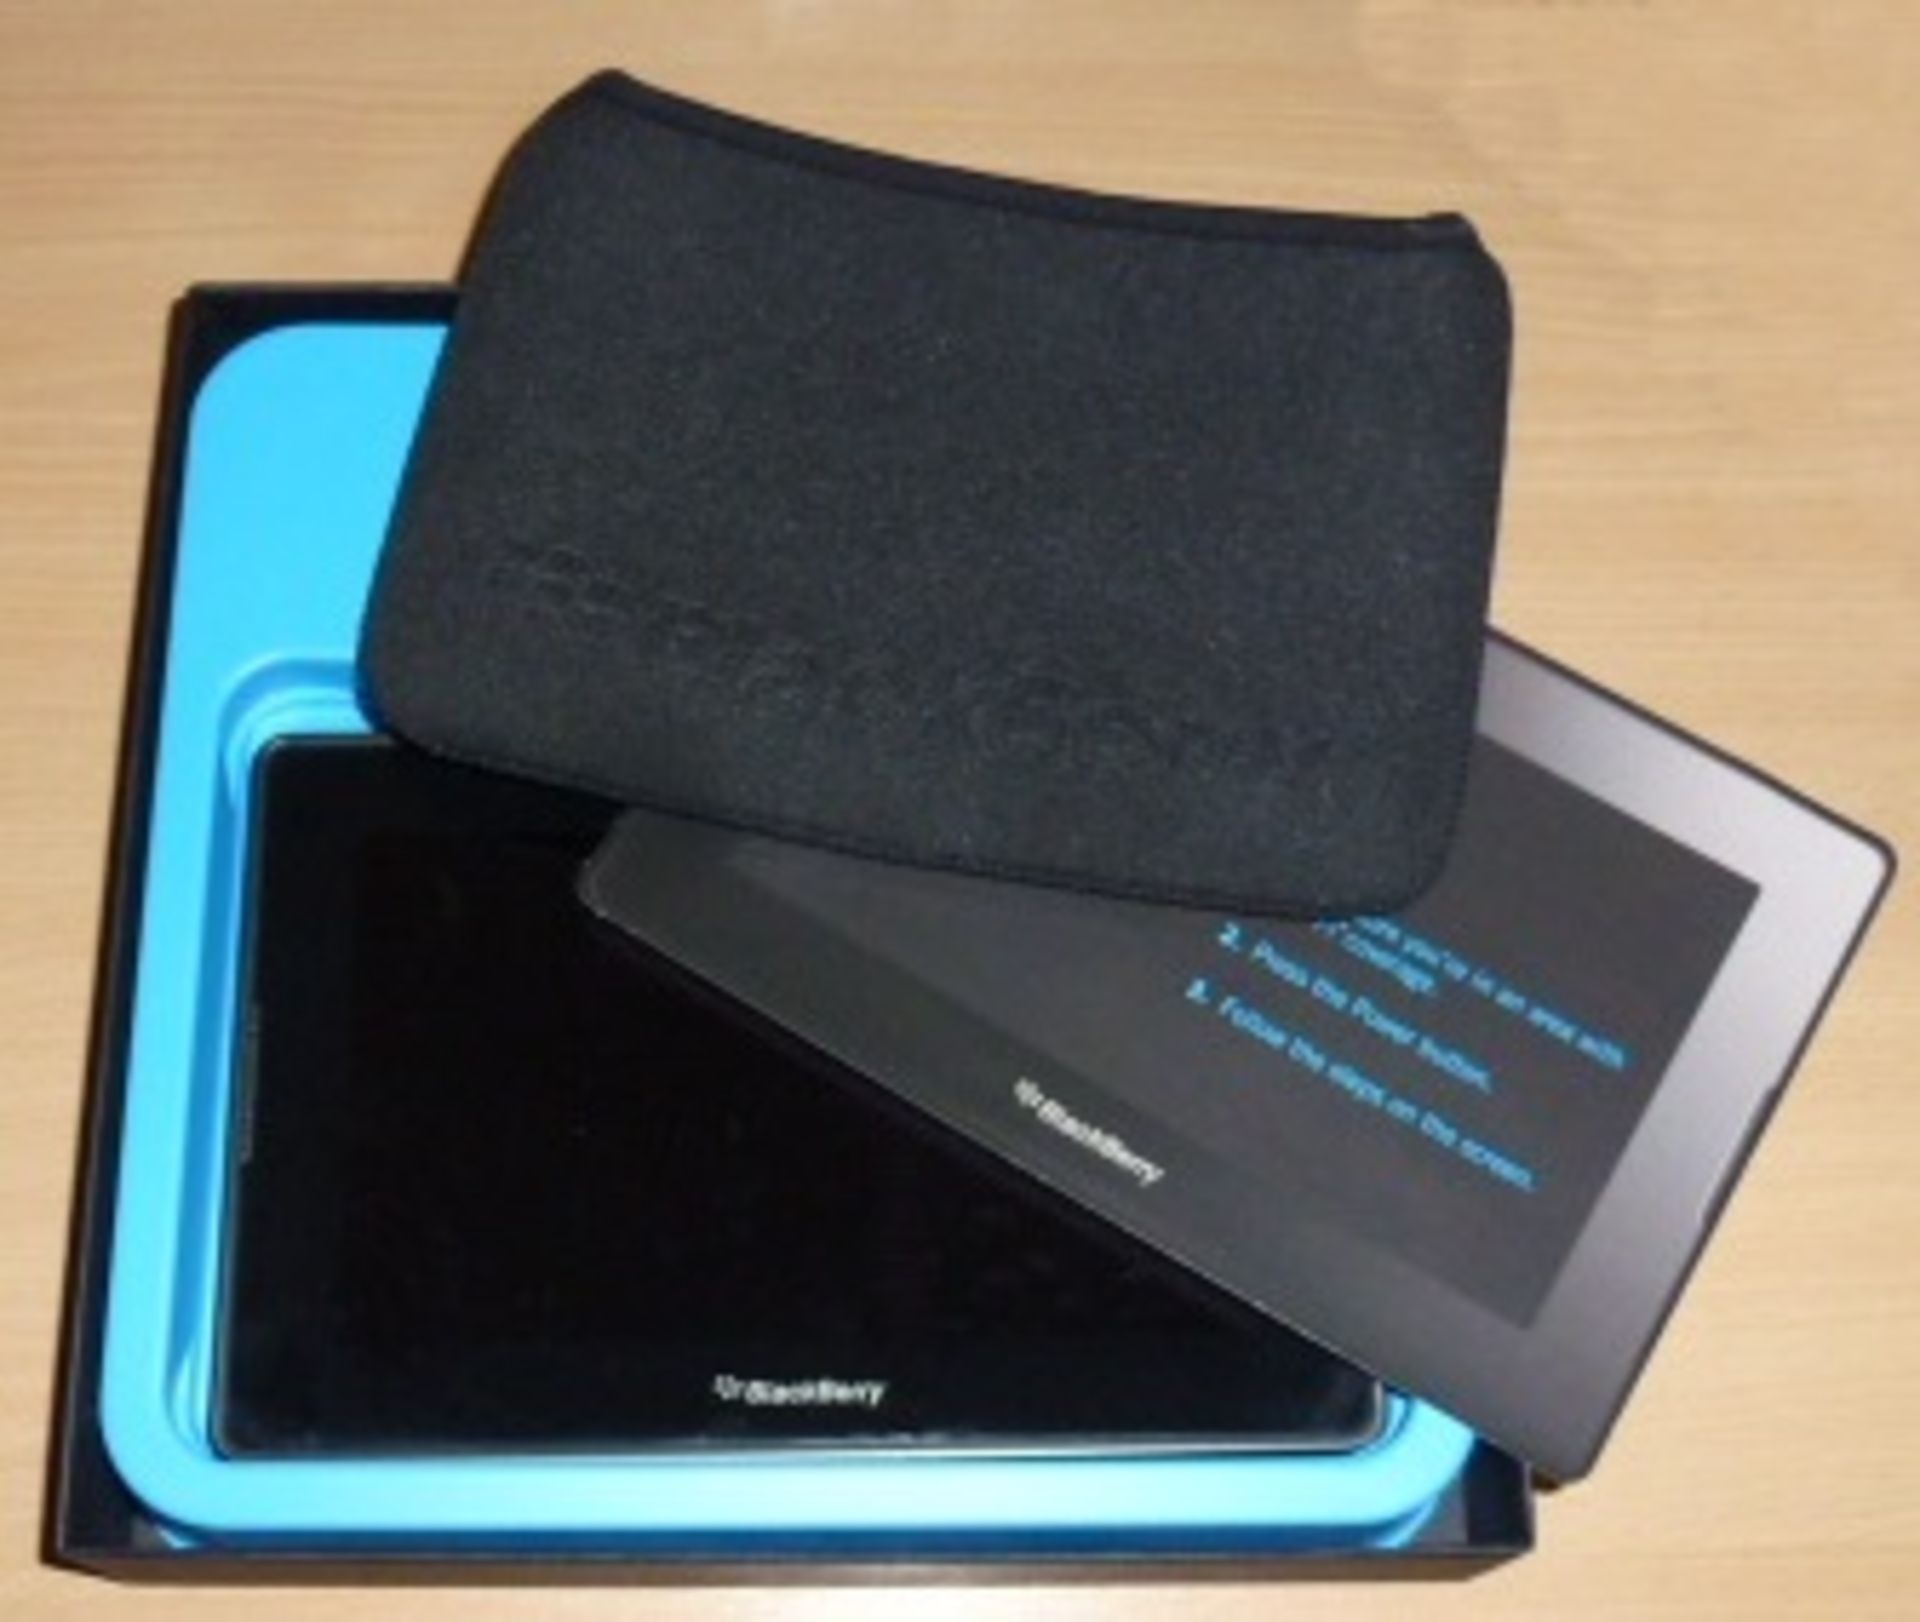 1 x Blackberry Playbook Tablet - 7 Inch Touch Screen - 1ghz Dual Core Processor - 64gb Storage - 1gb - Image 3 of 4